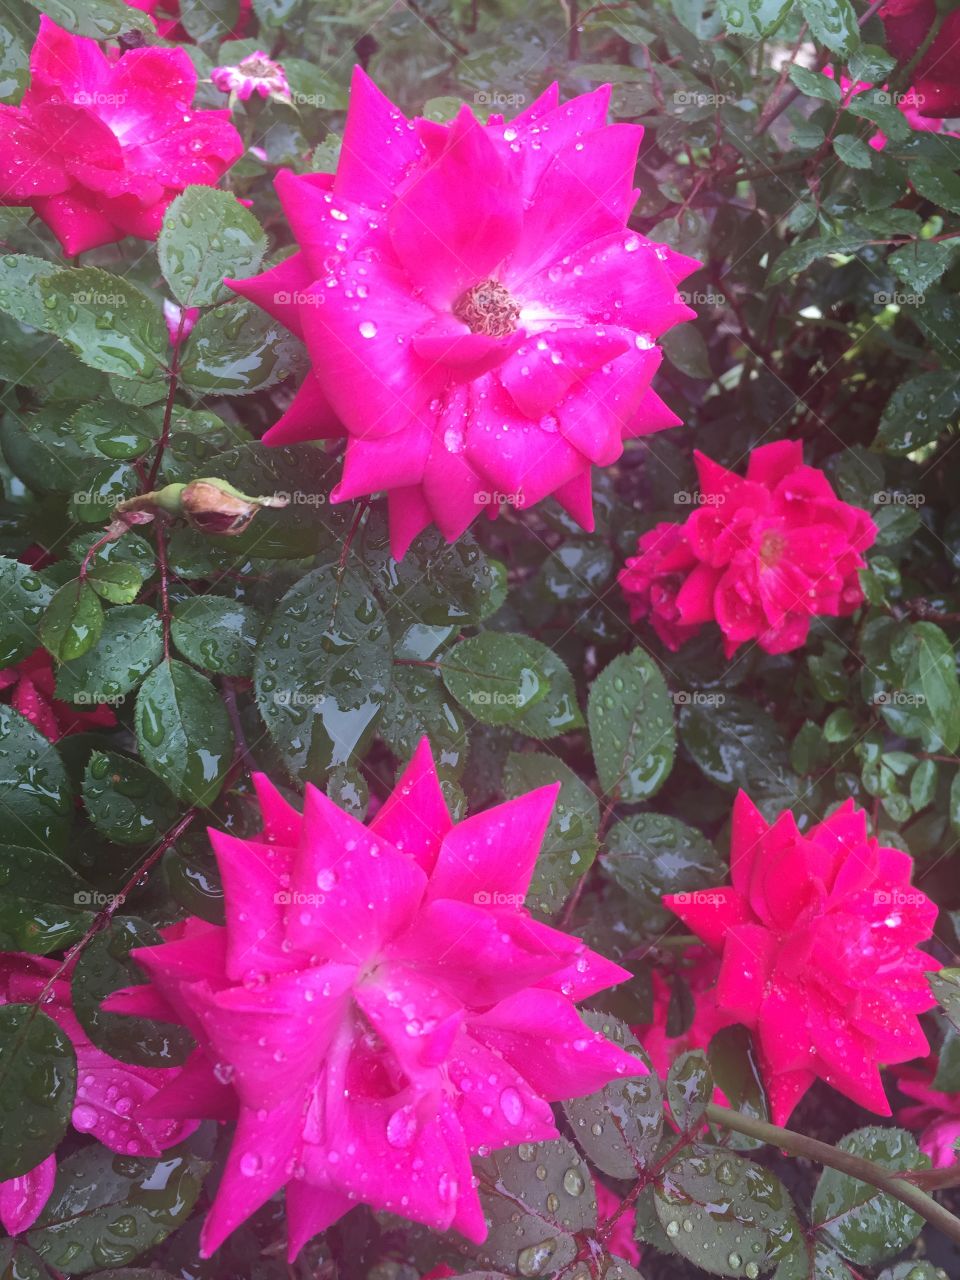 Red and pink roses in front of greenery on rainy day.